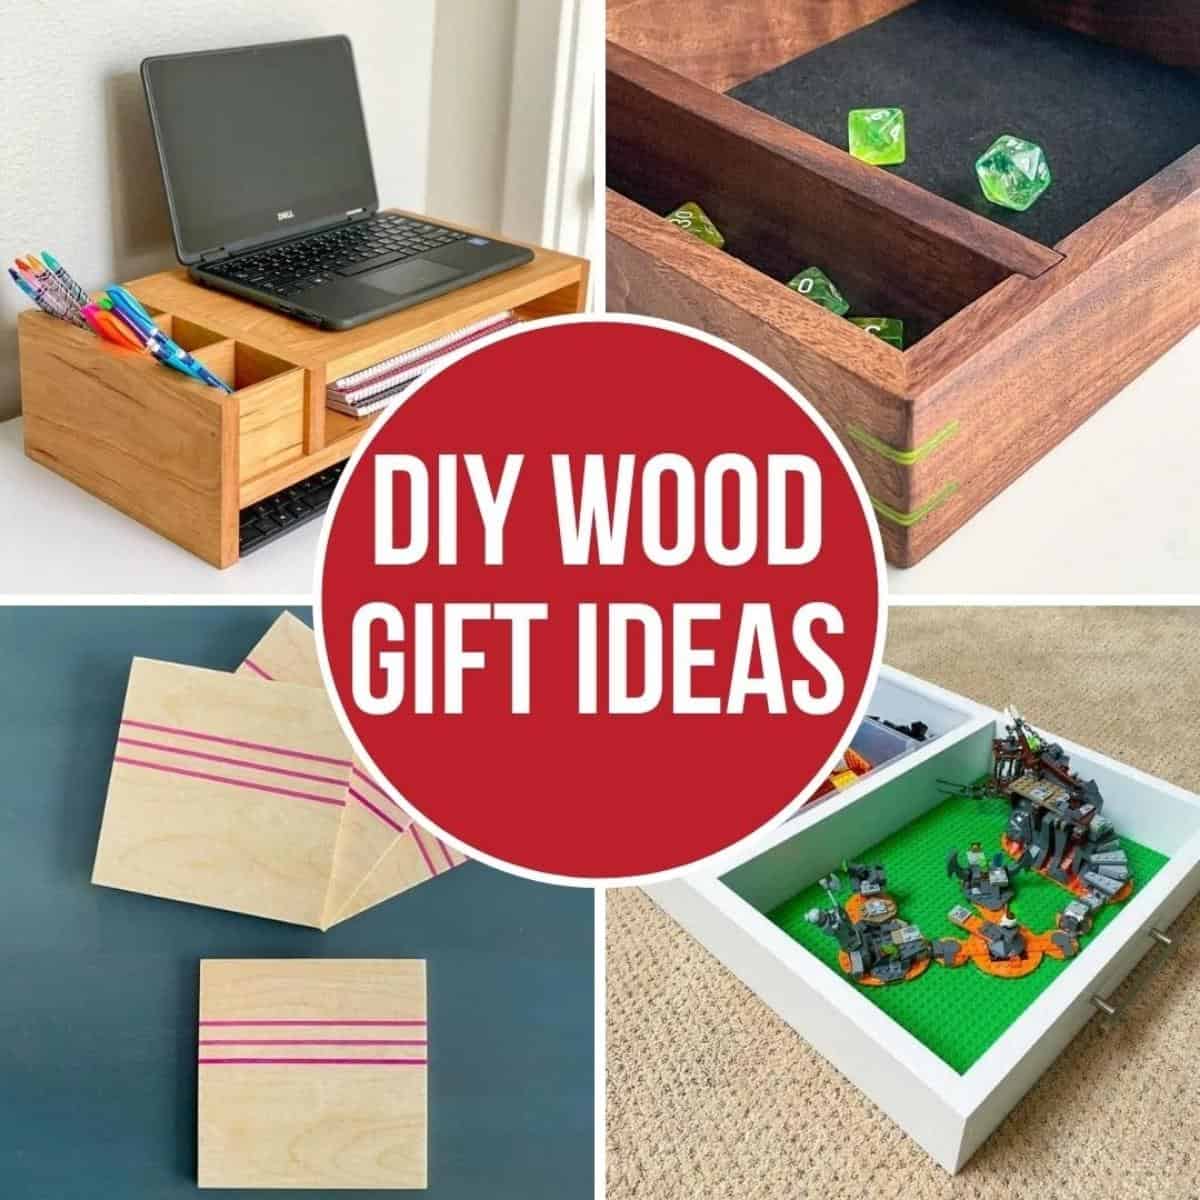 Woodworking gift ideas - Small Woodworking Gift Ideas - WoodWorking  Projects & Plans  gift-ideas/